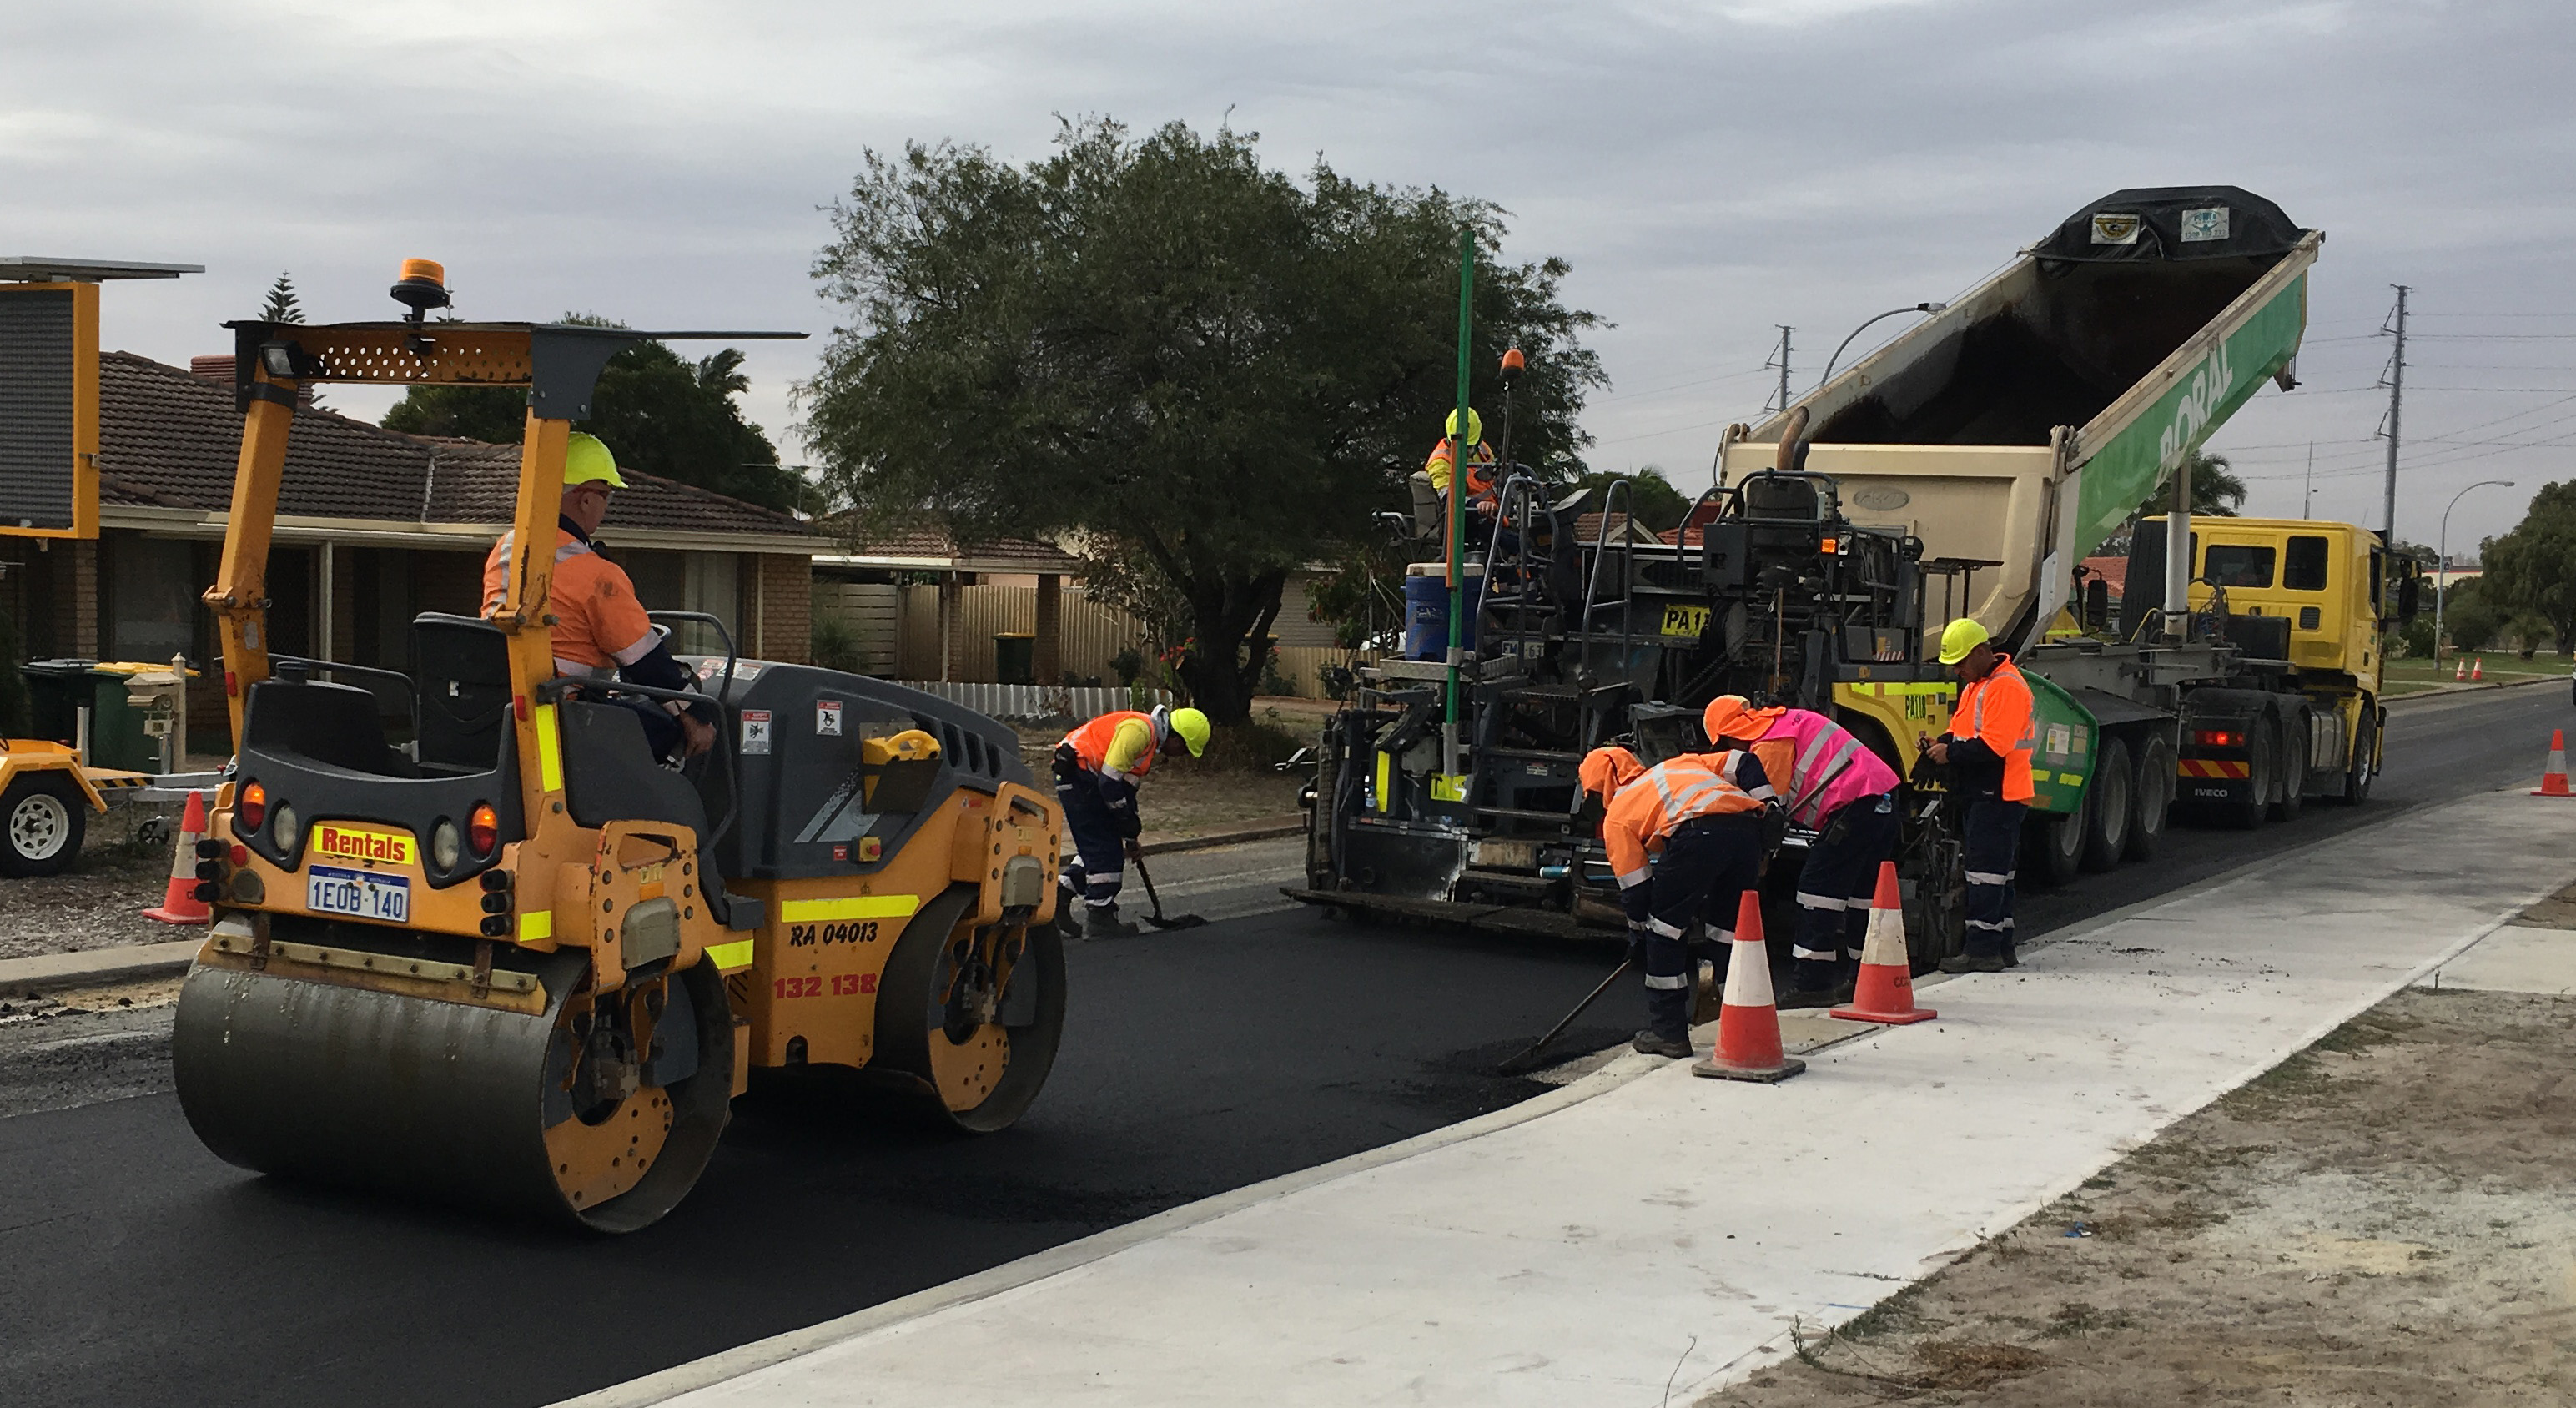 Boral builds Perth street with recycled asphalt, glass, plastic and tyres